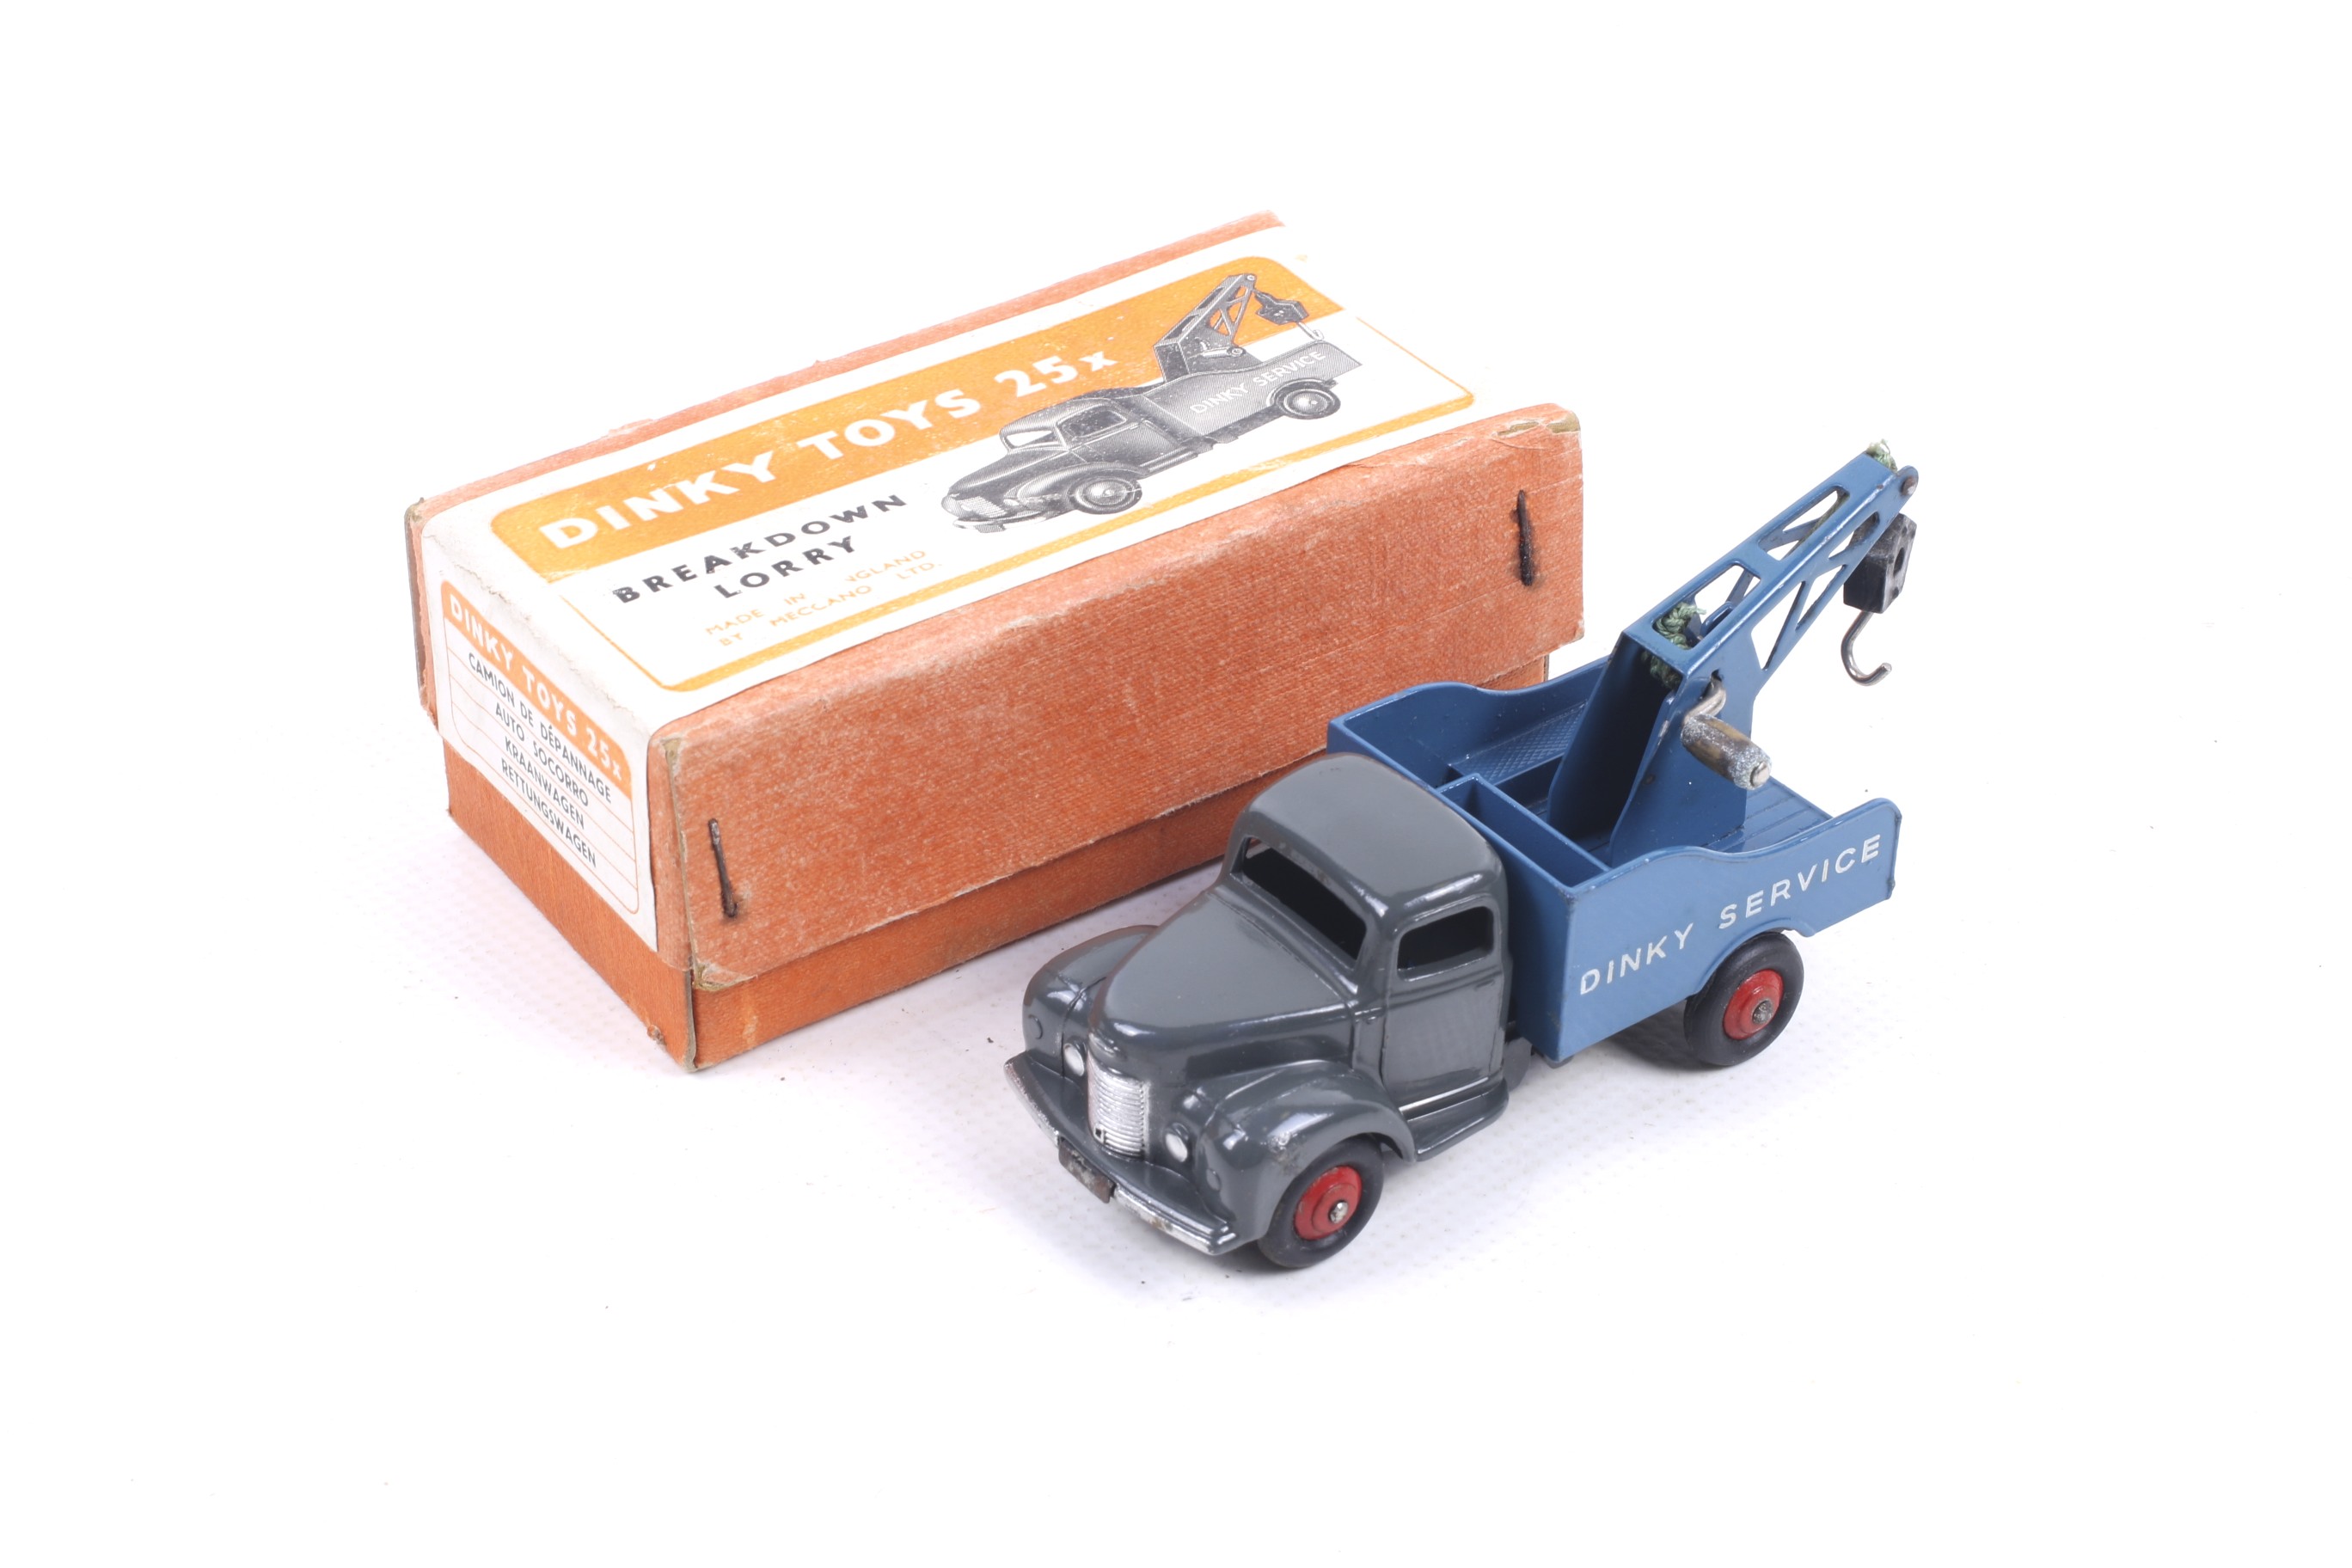 A Dinky diecast breakdown lorry. No. 25X with grey body and blue bed, in original box.